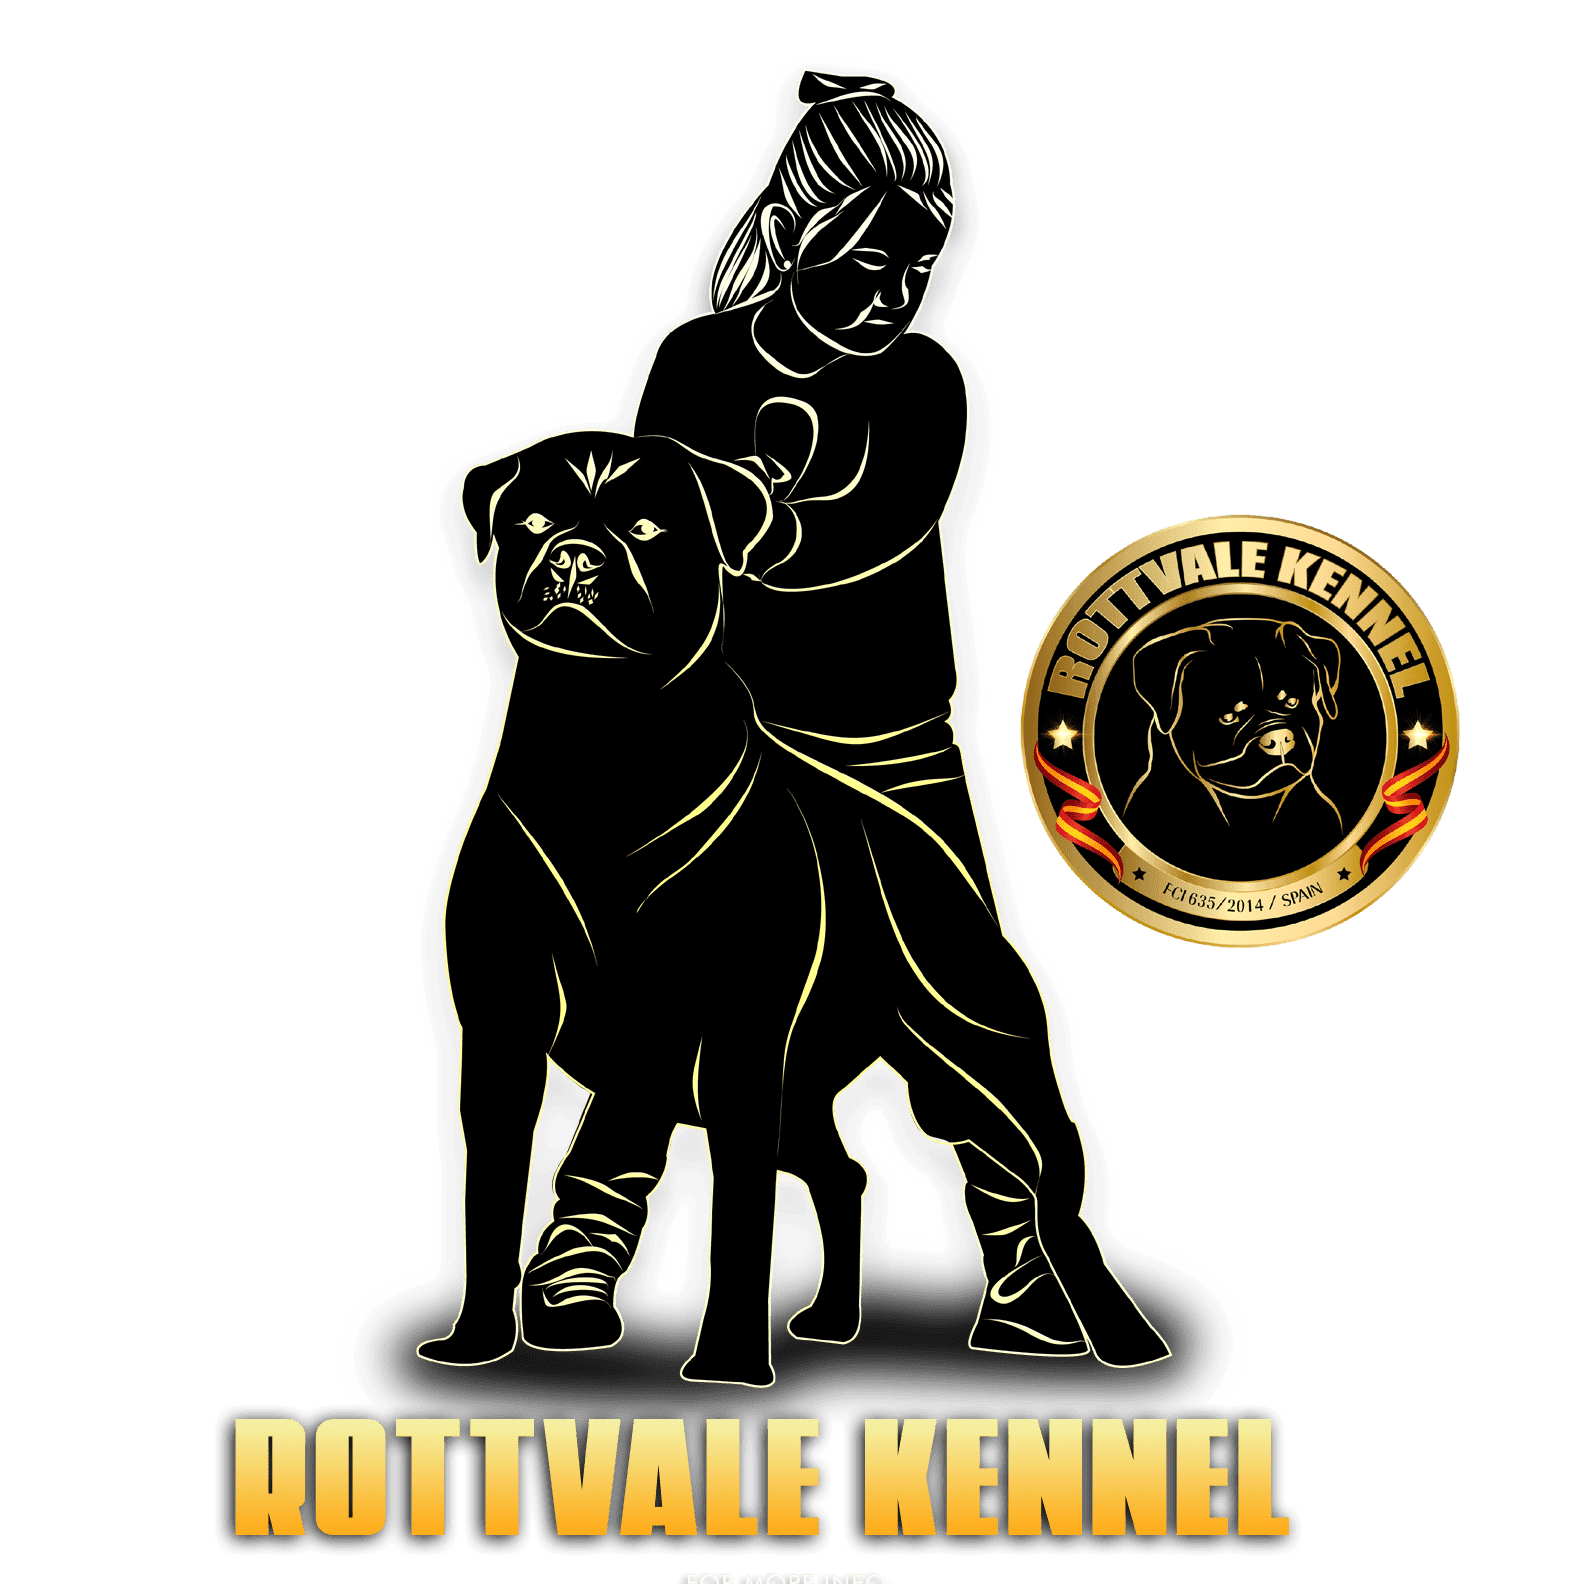 Rottvale Kennel